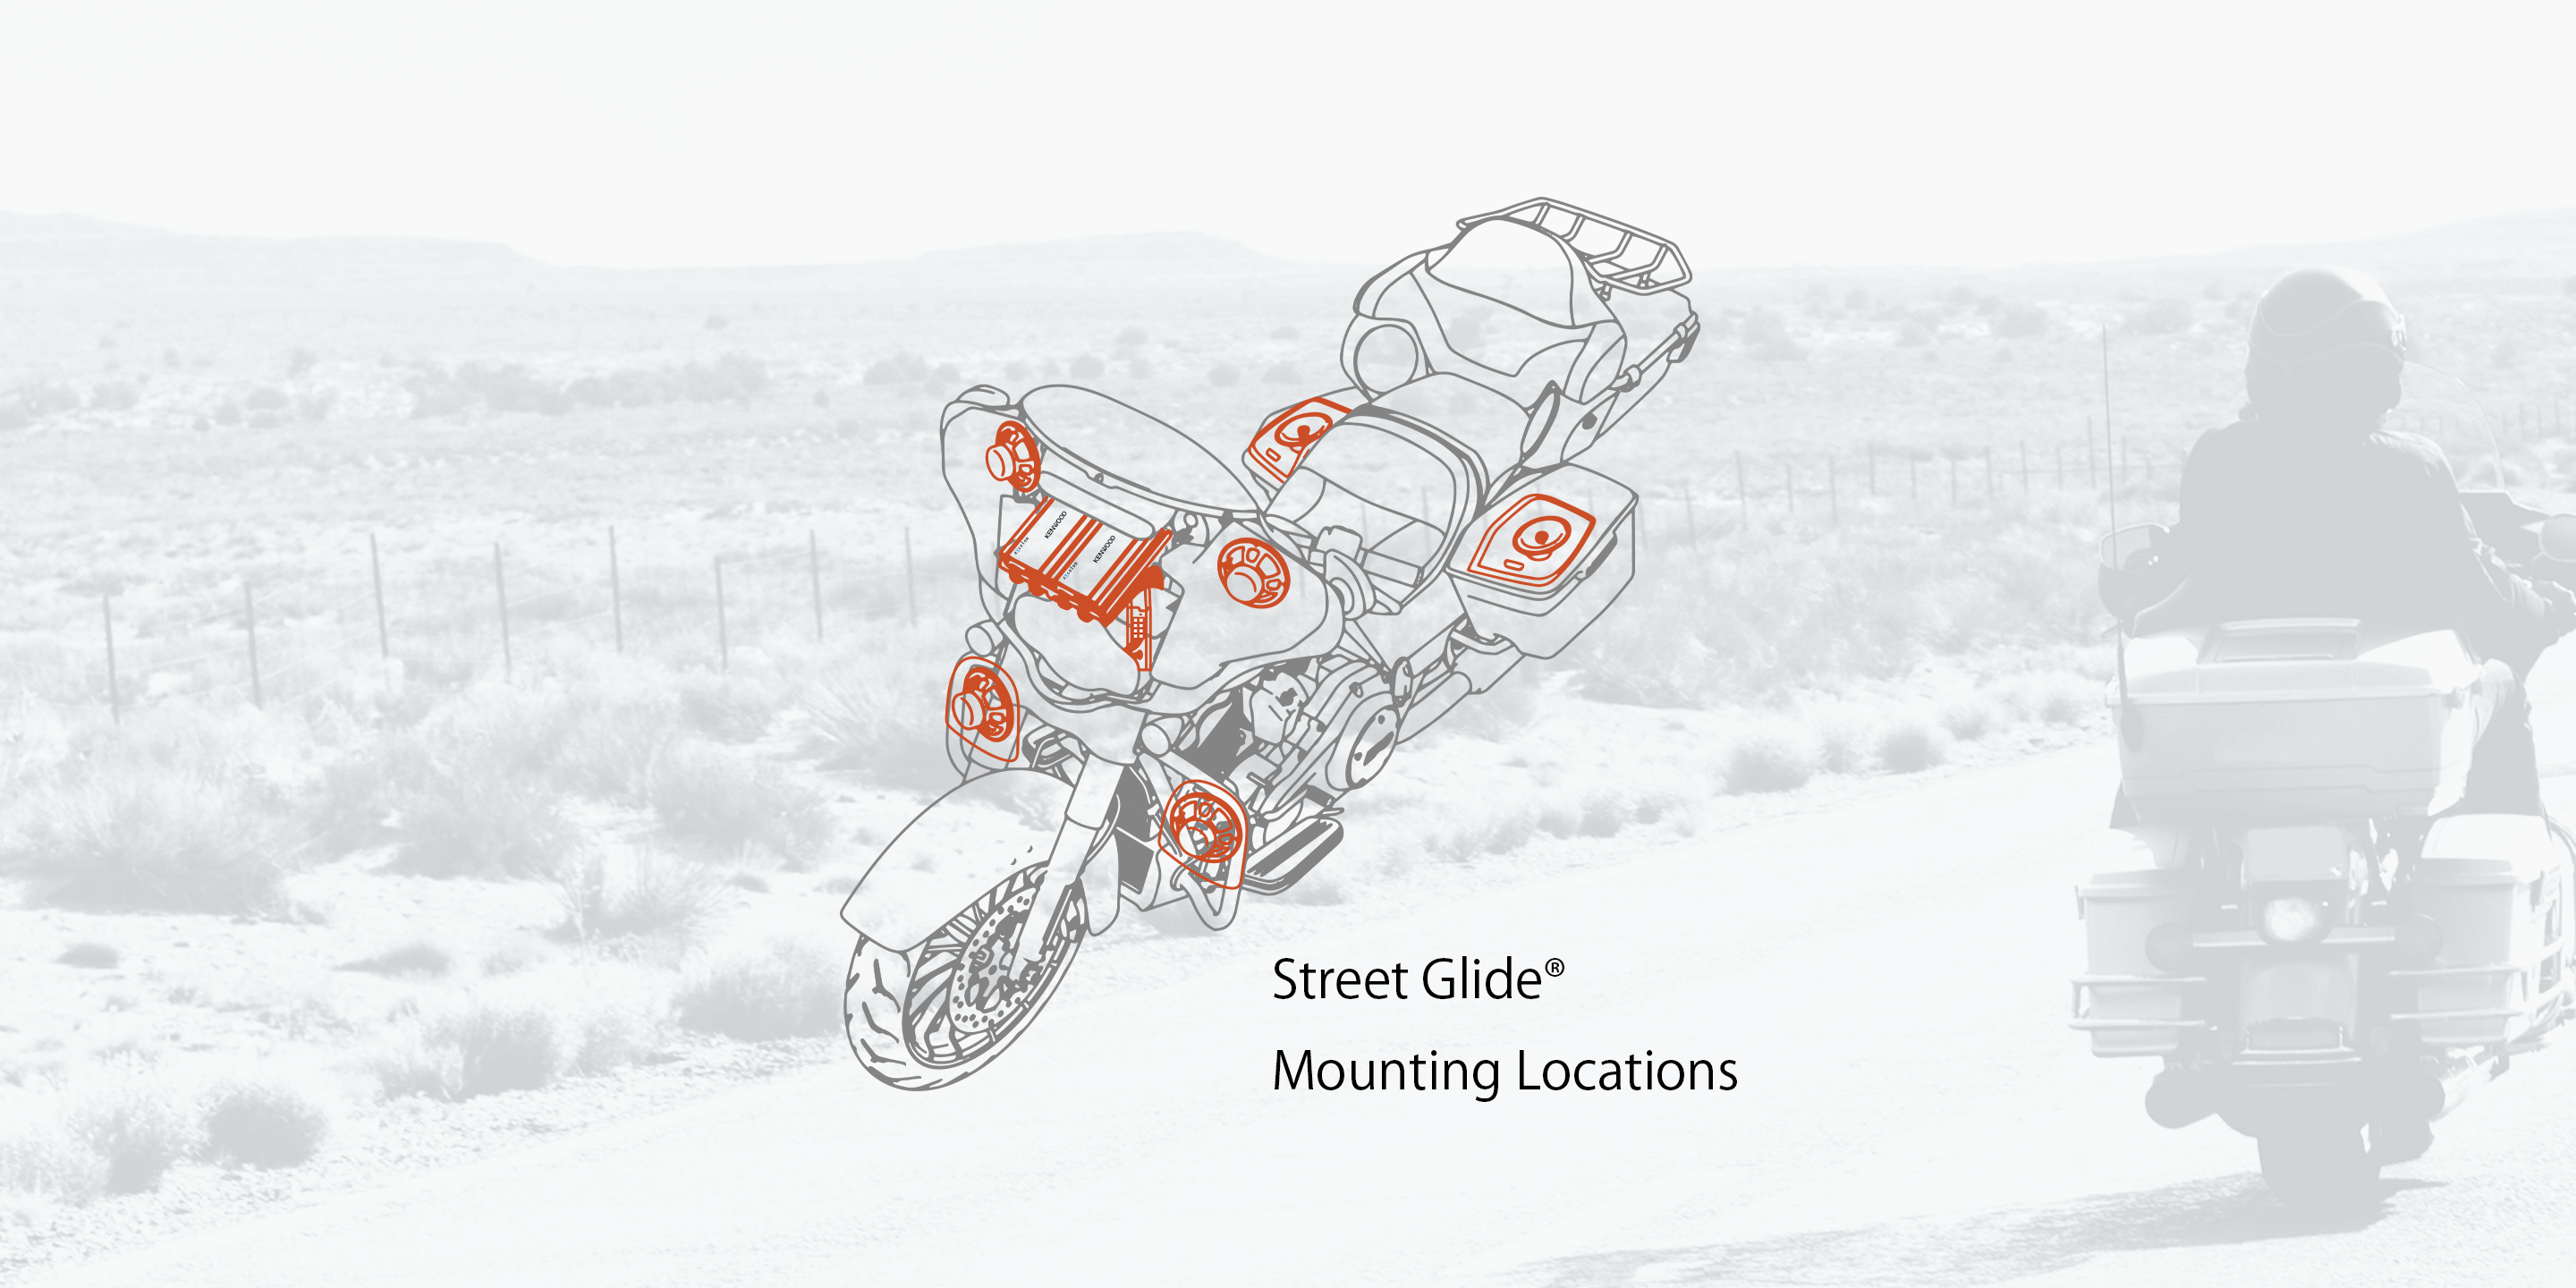 Street Glide® Mounting Locations & Road Glide® Mounting Locations